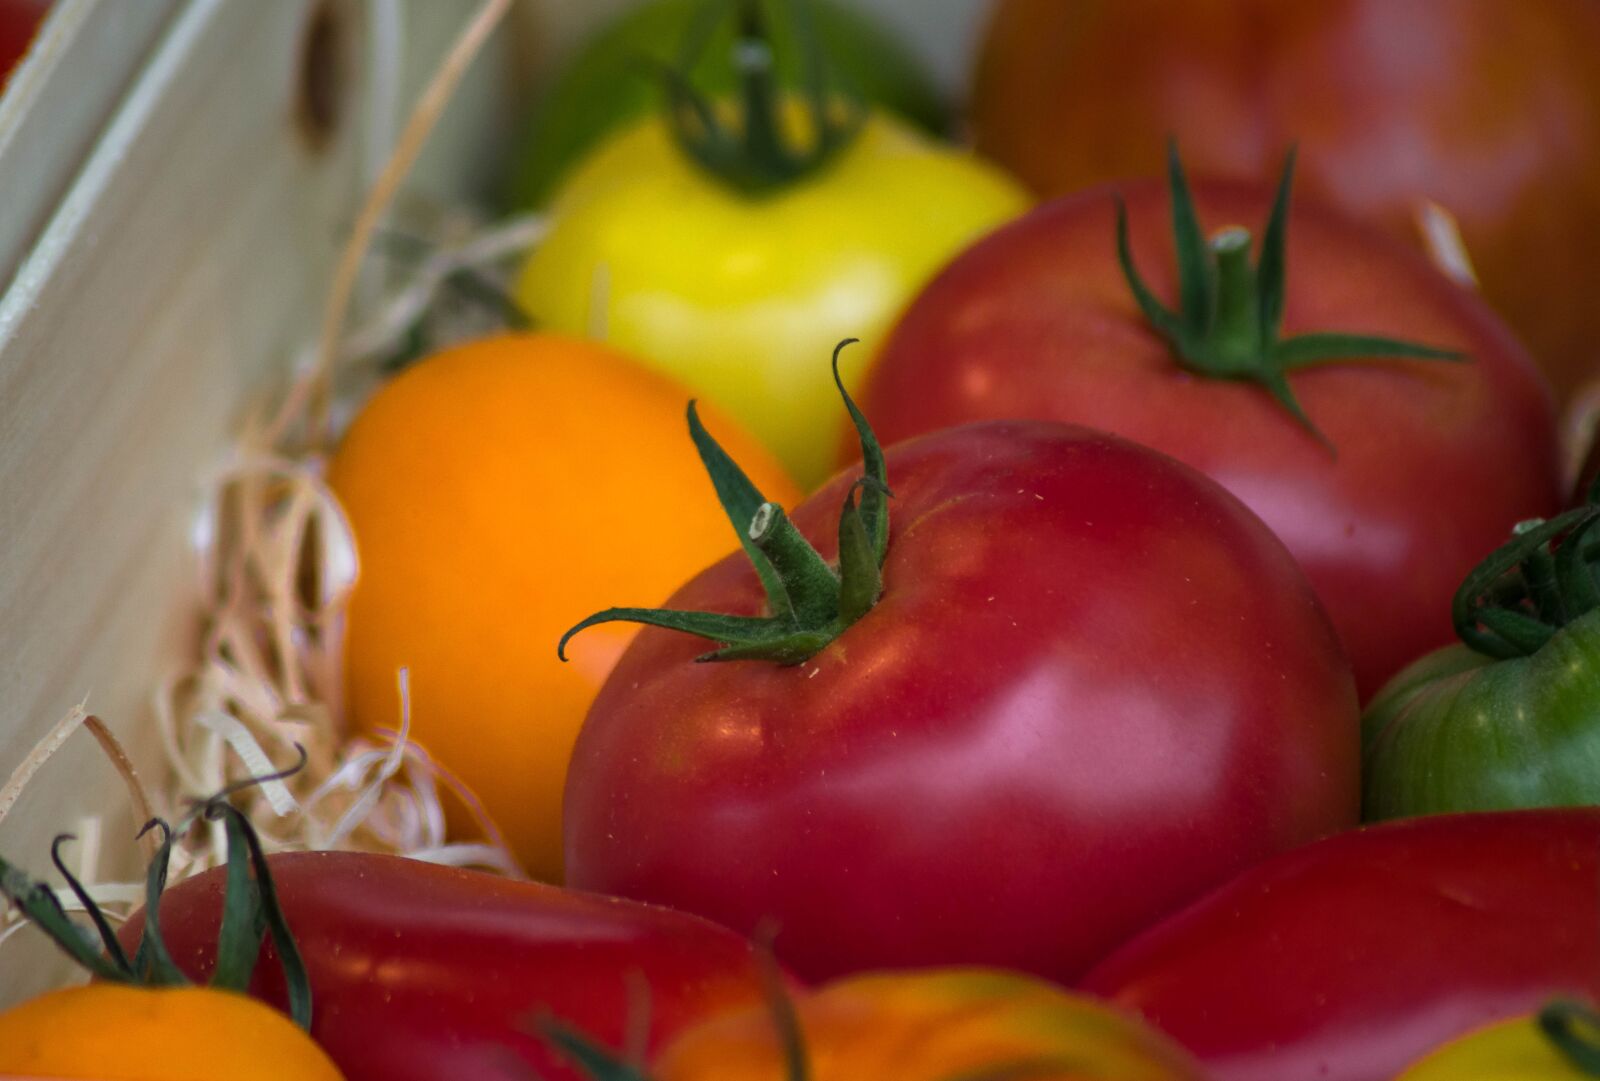 Pentax KP sample photo. Tomatoes, vegetables, harvest photography